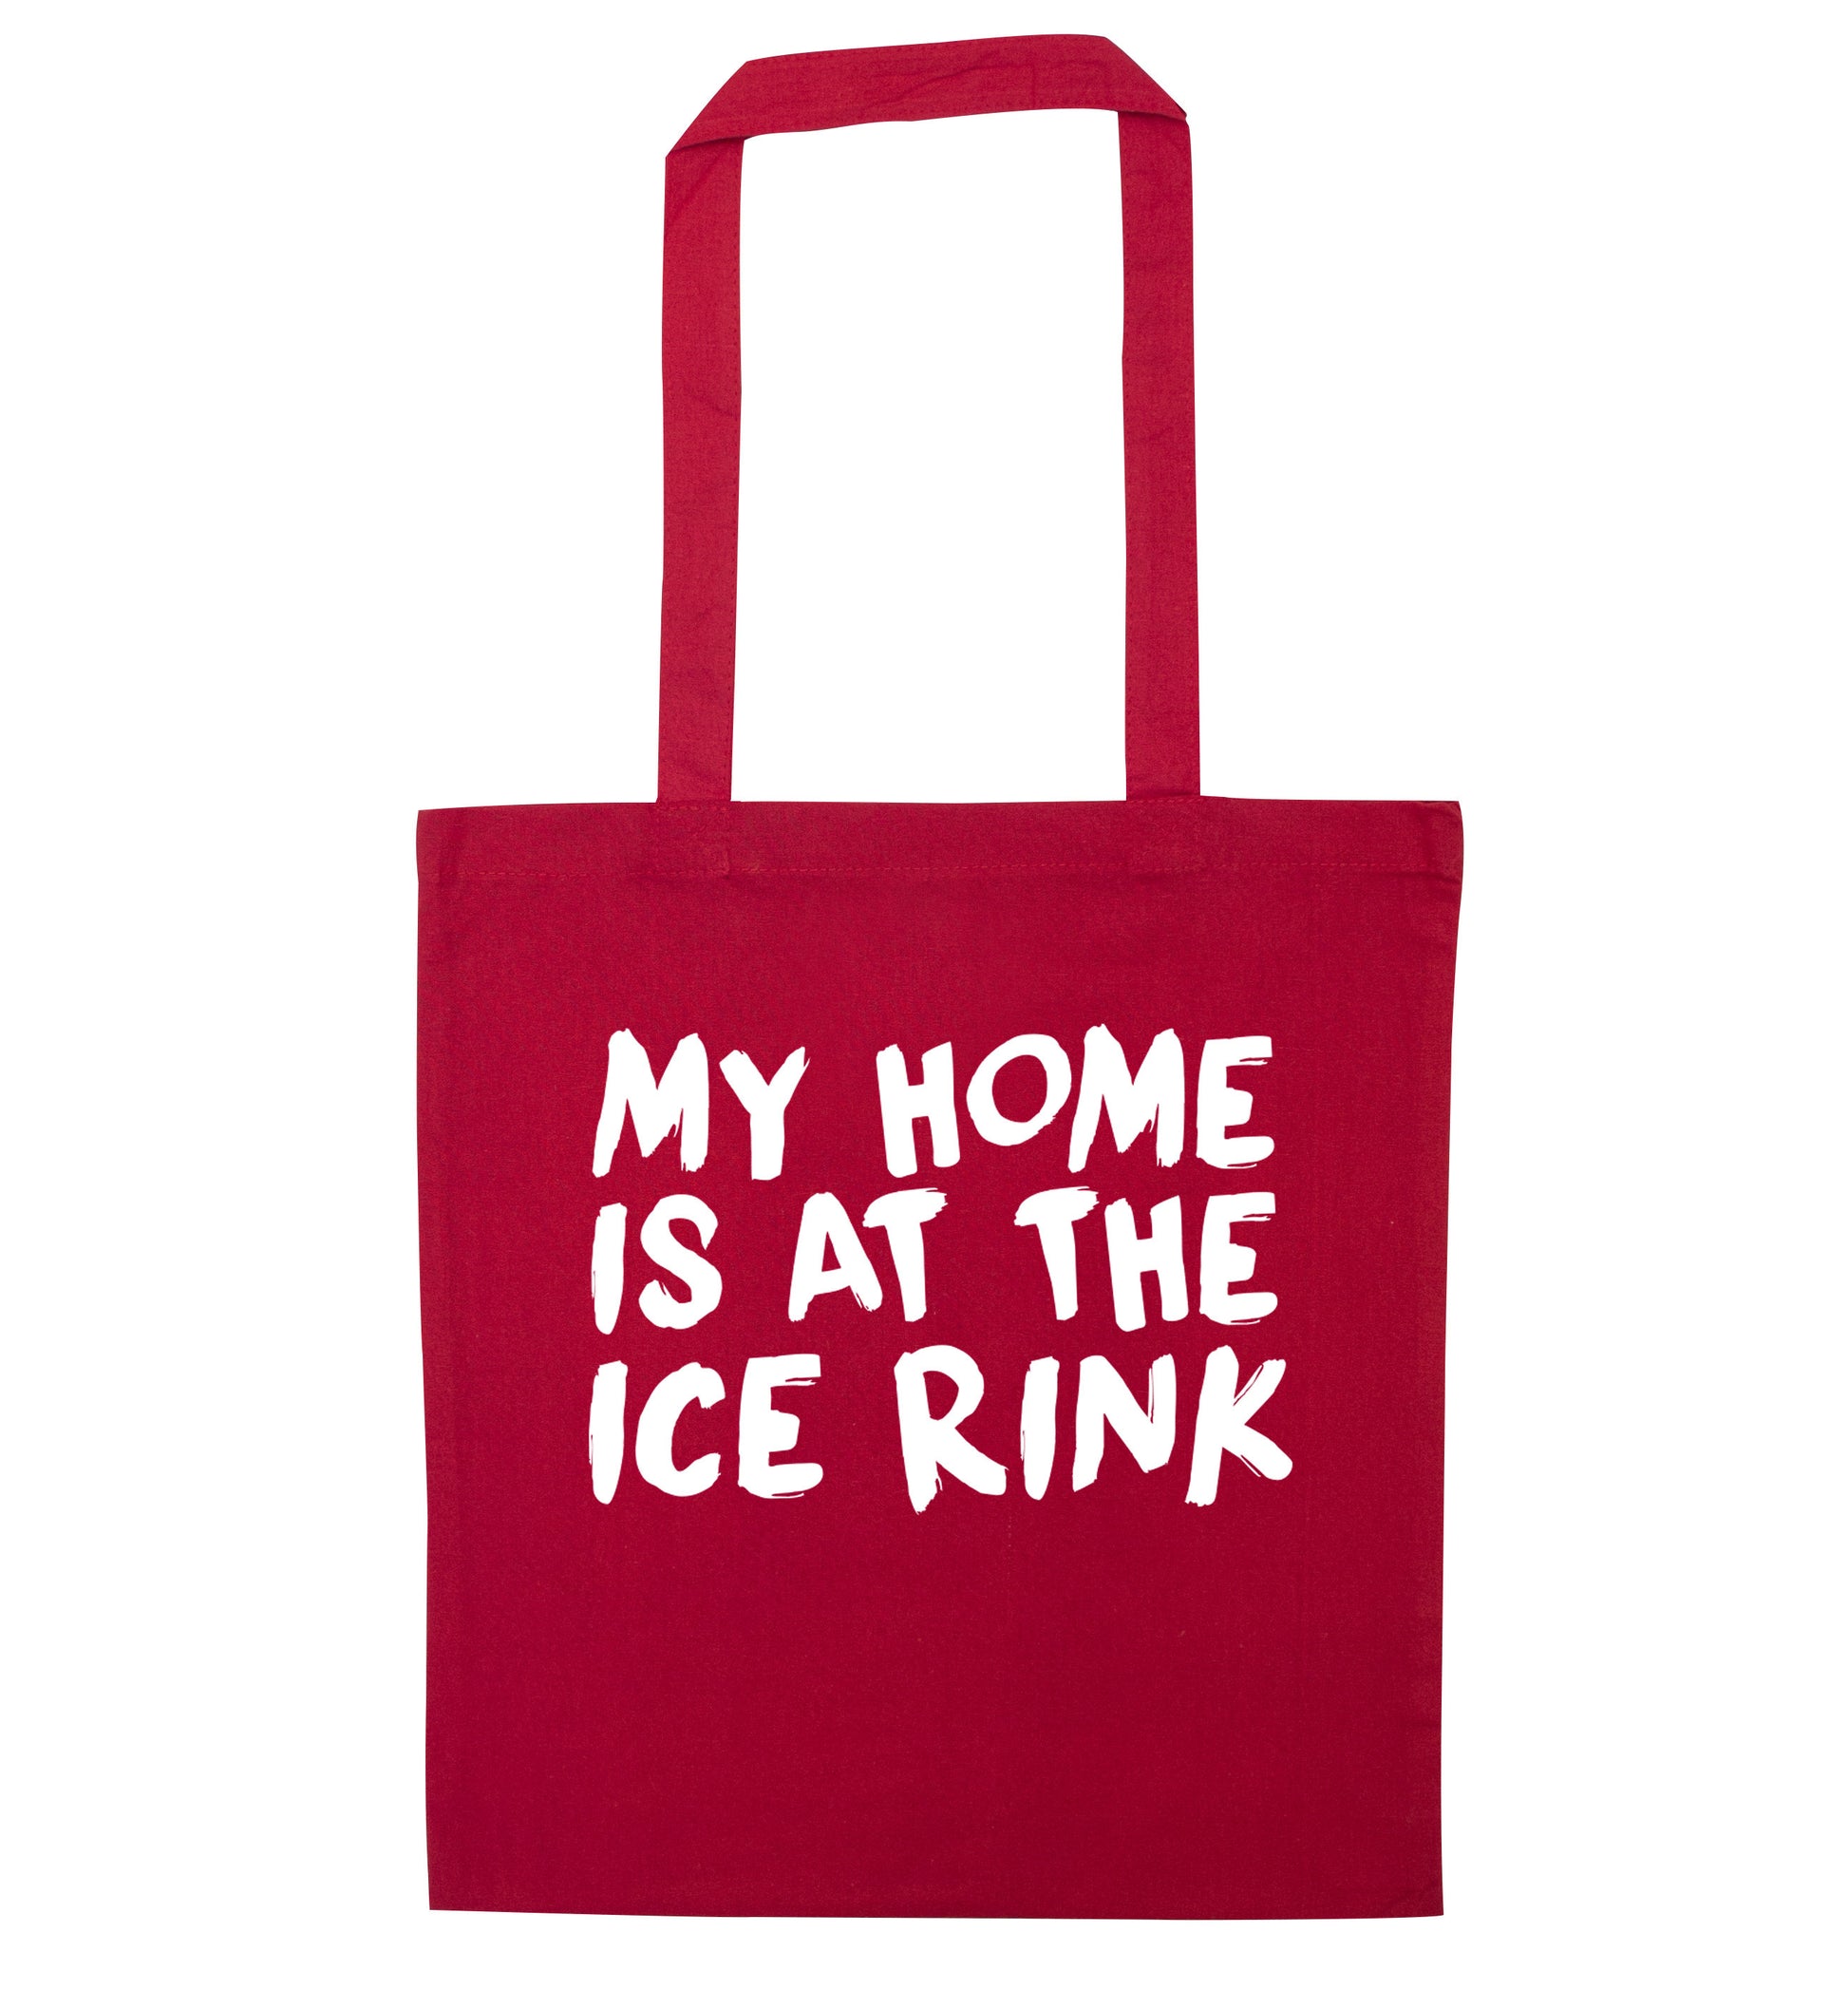 My home is at the ice rink red tote bag